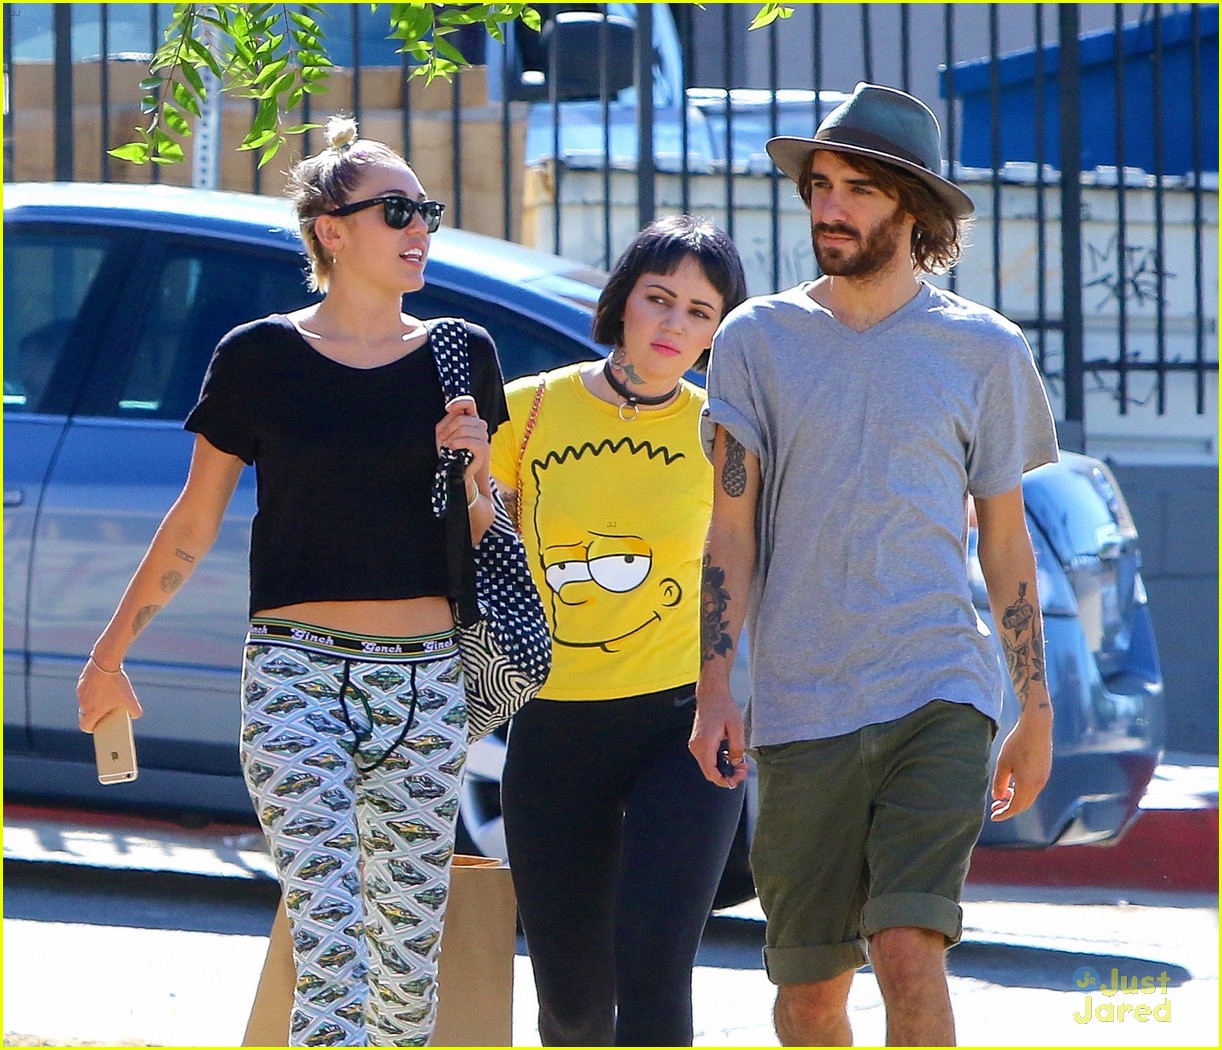 miley cyrus grab sushi lunch before july 4th weekend 02